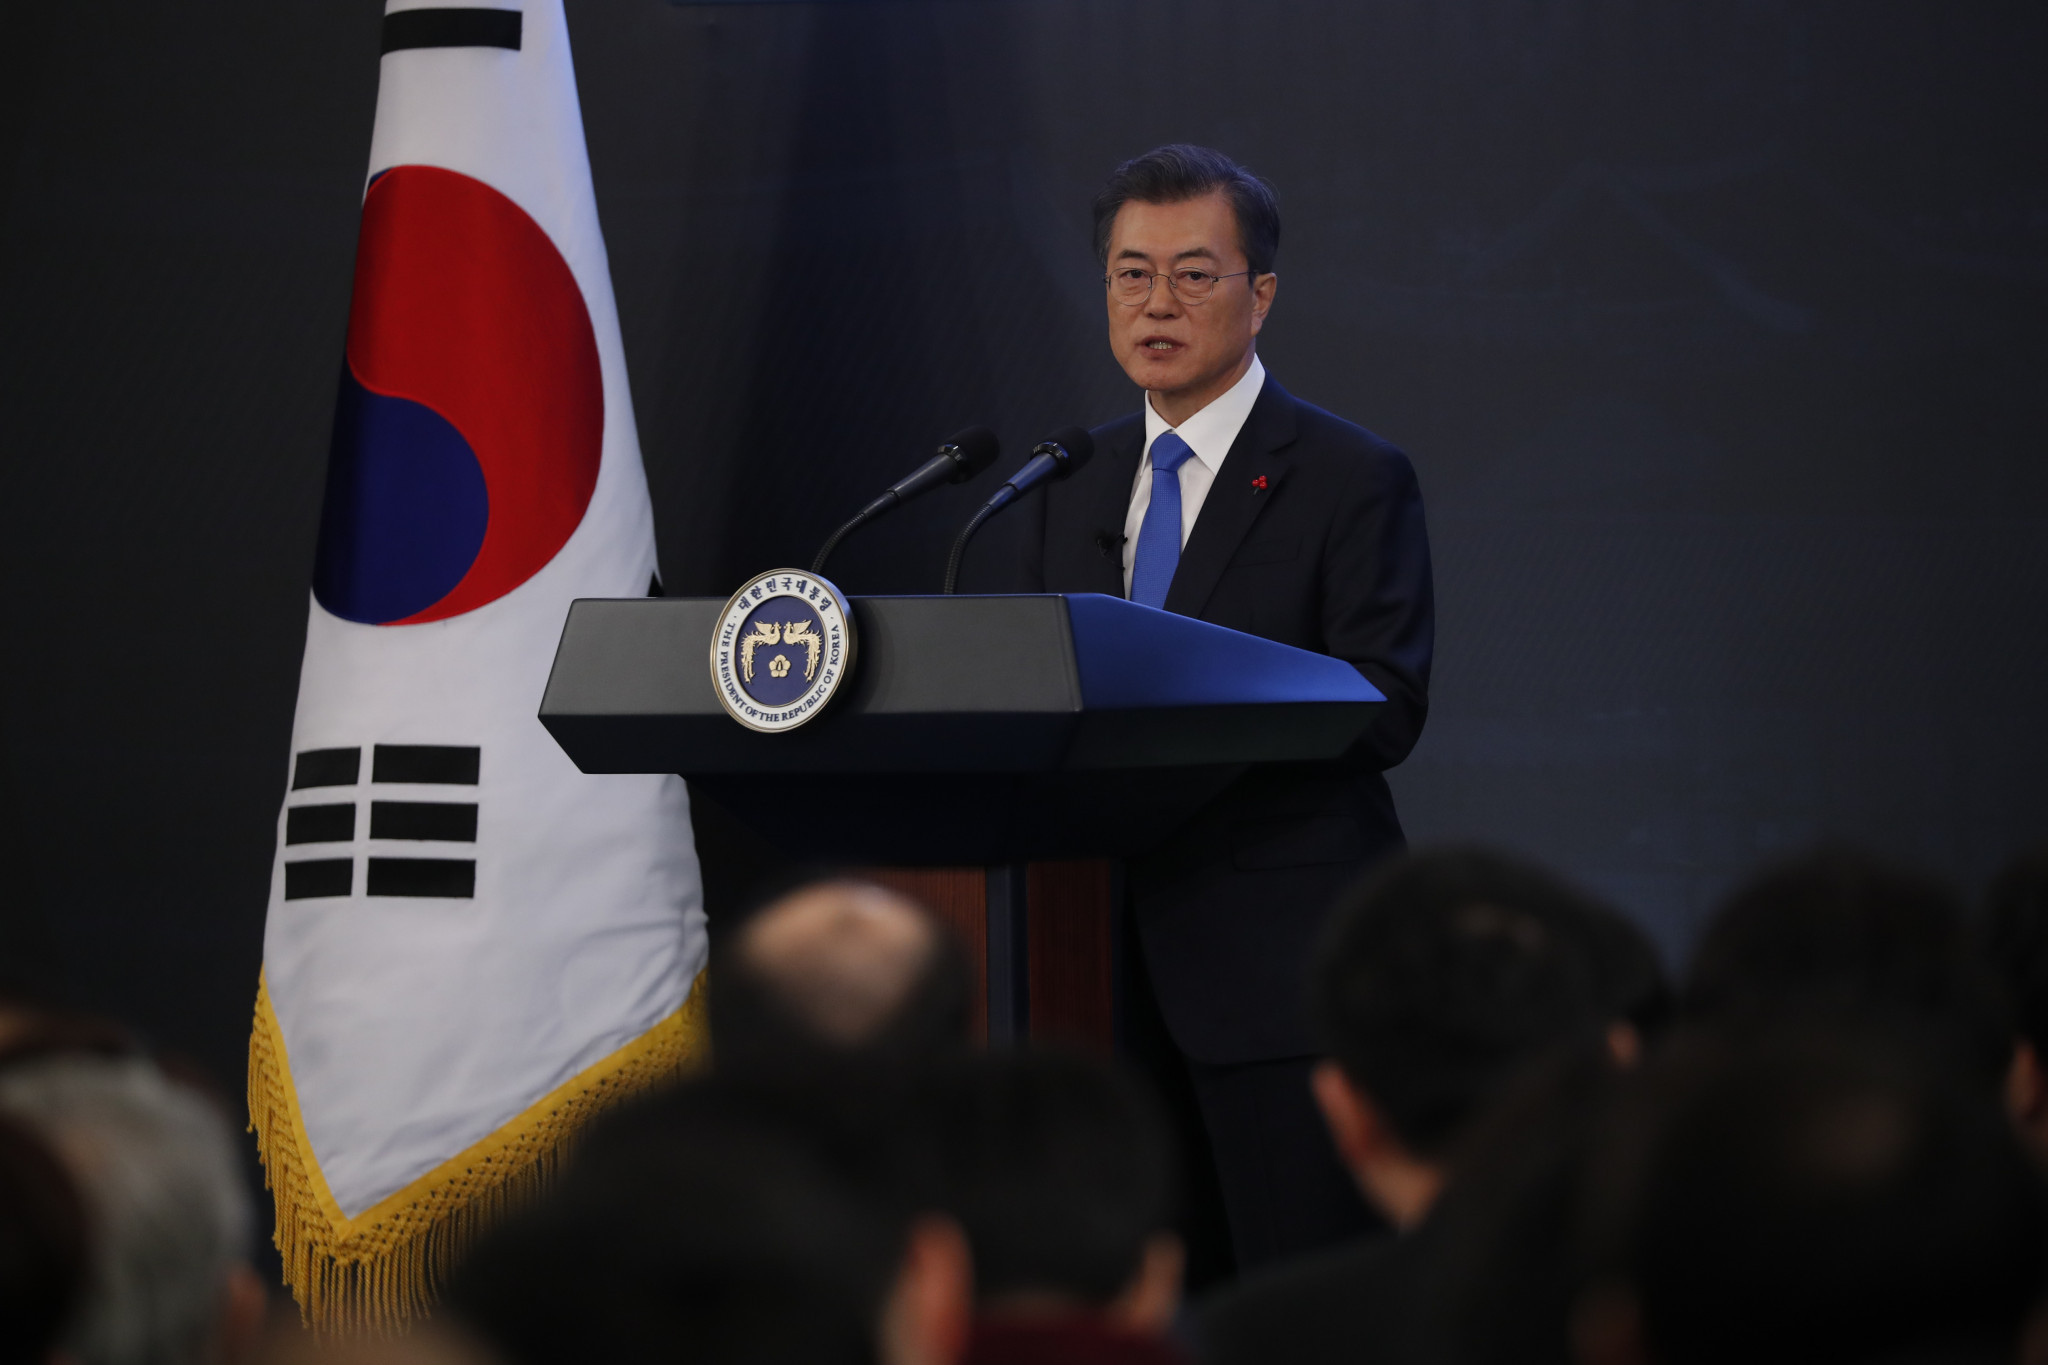 South Korean President Moon Jae-in hopes 2018 could be a turning point in relations on the Korean Peninsula ©Getty Images